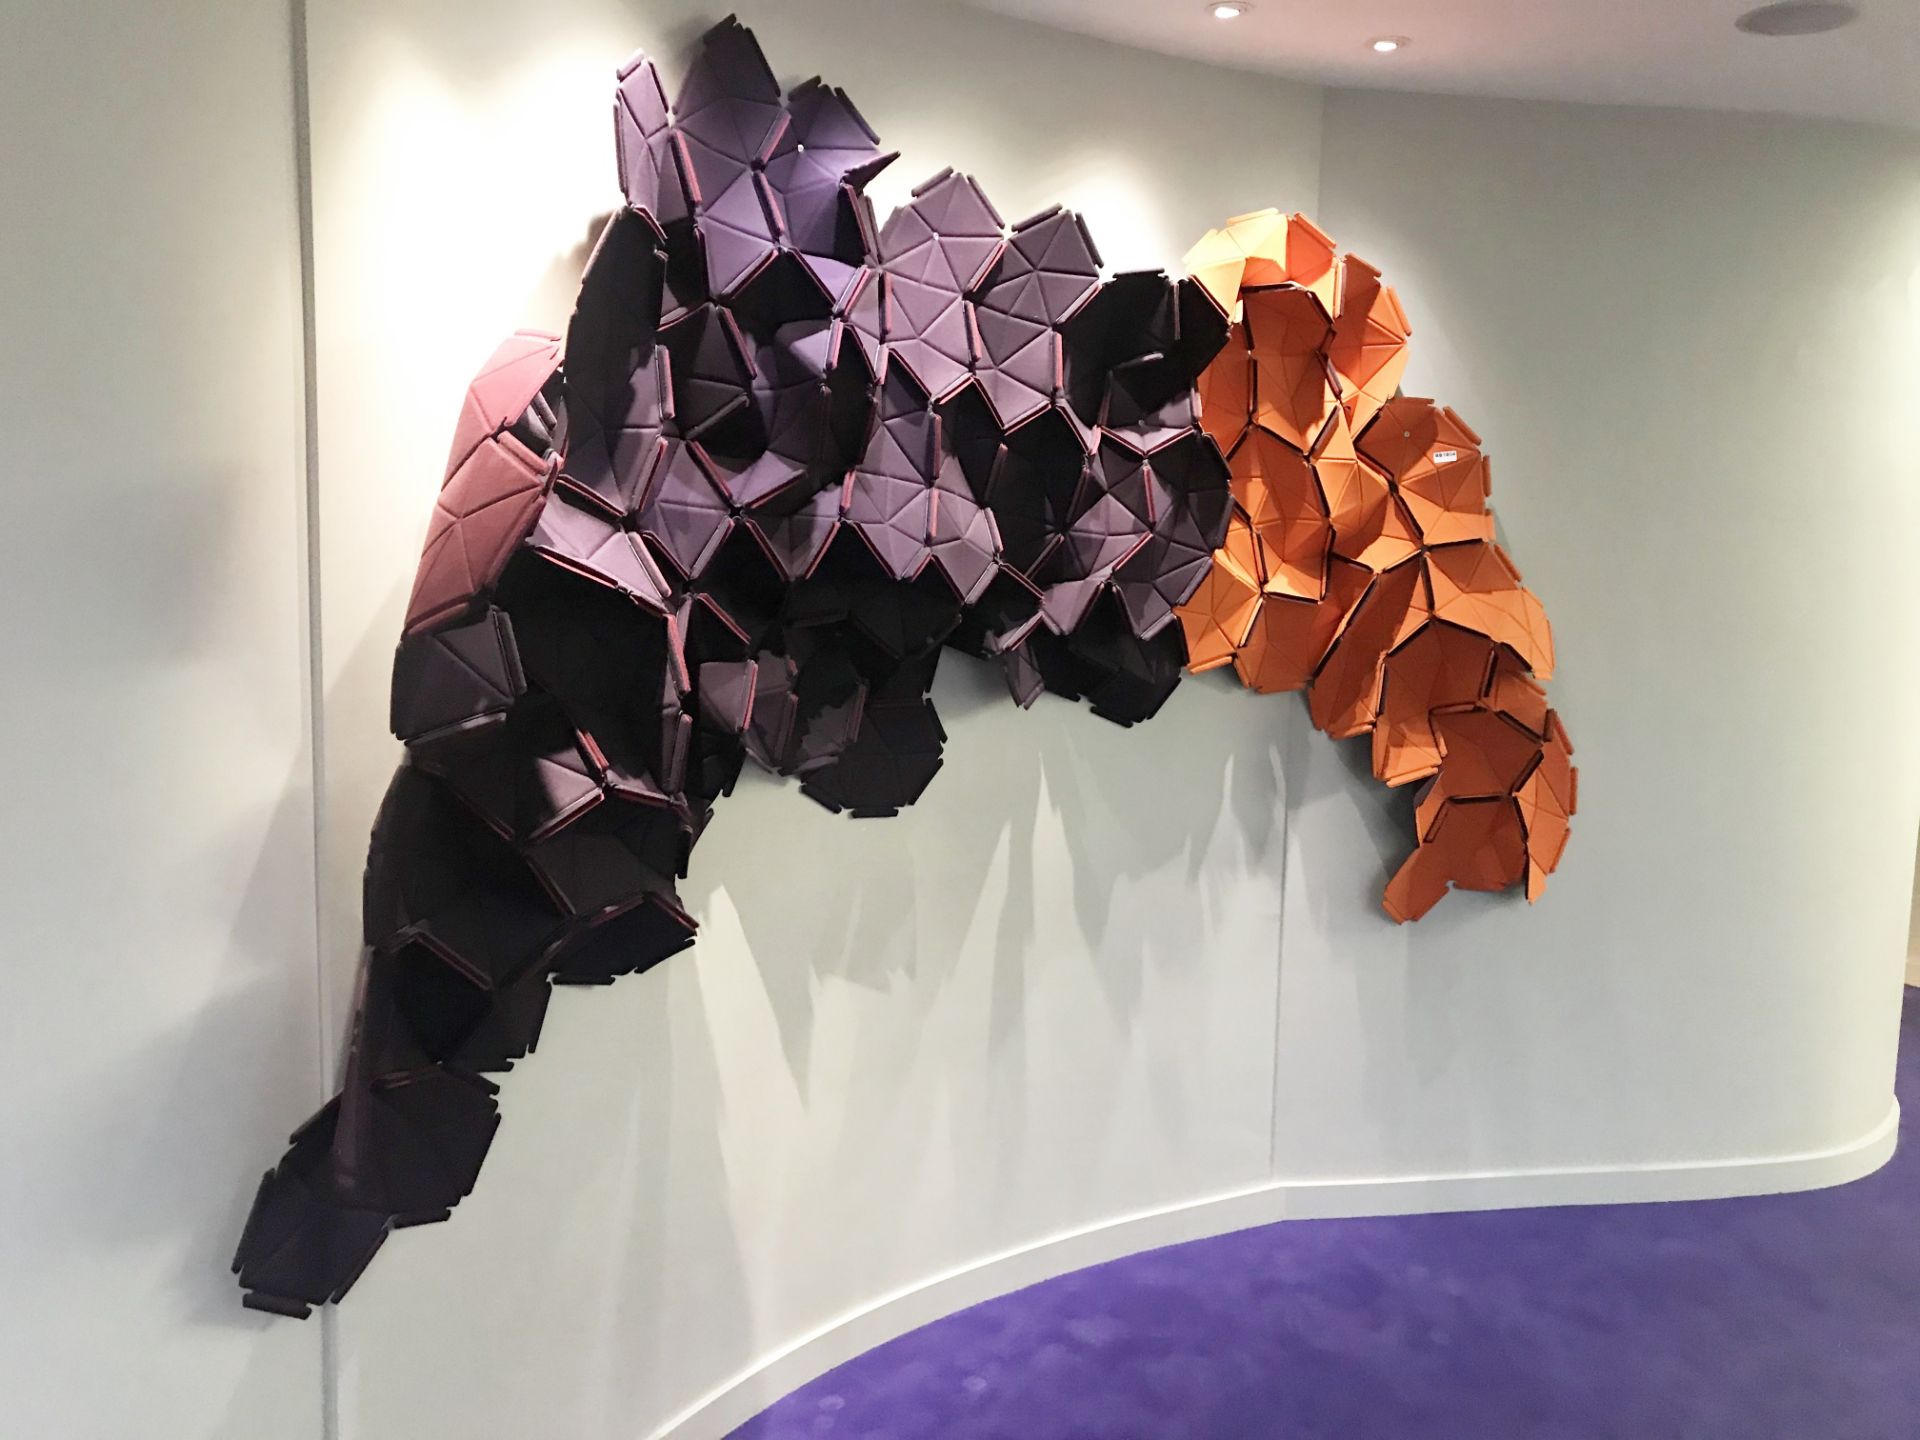 1 x Kvadrat Cloud Three-Dimensional Contemporary Wall Art - 100% Wool - Designed By Ronan and - Image 7 of 7